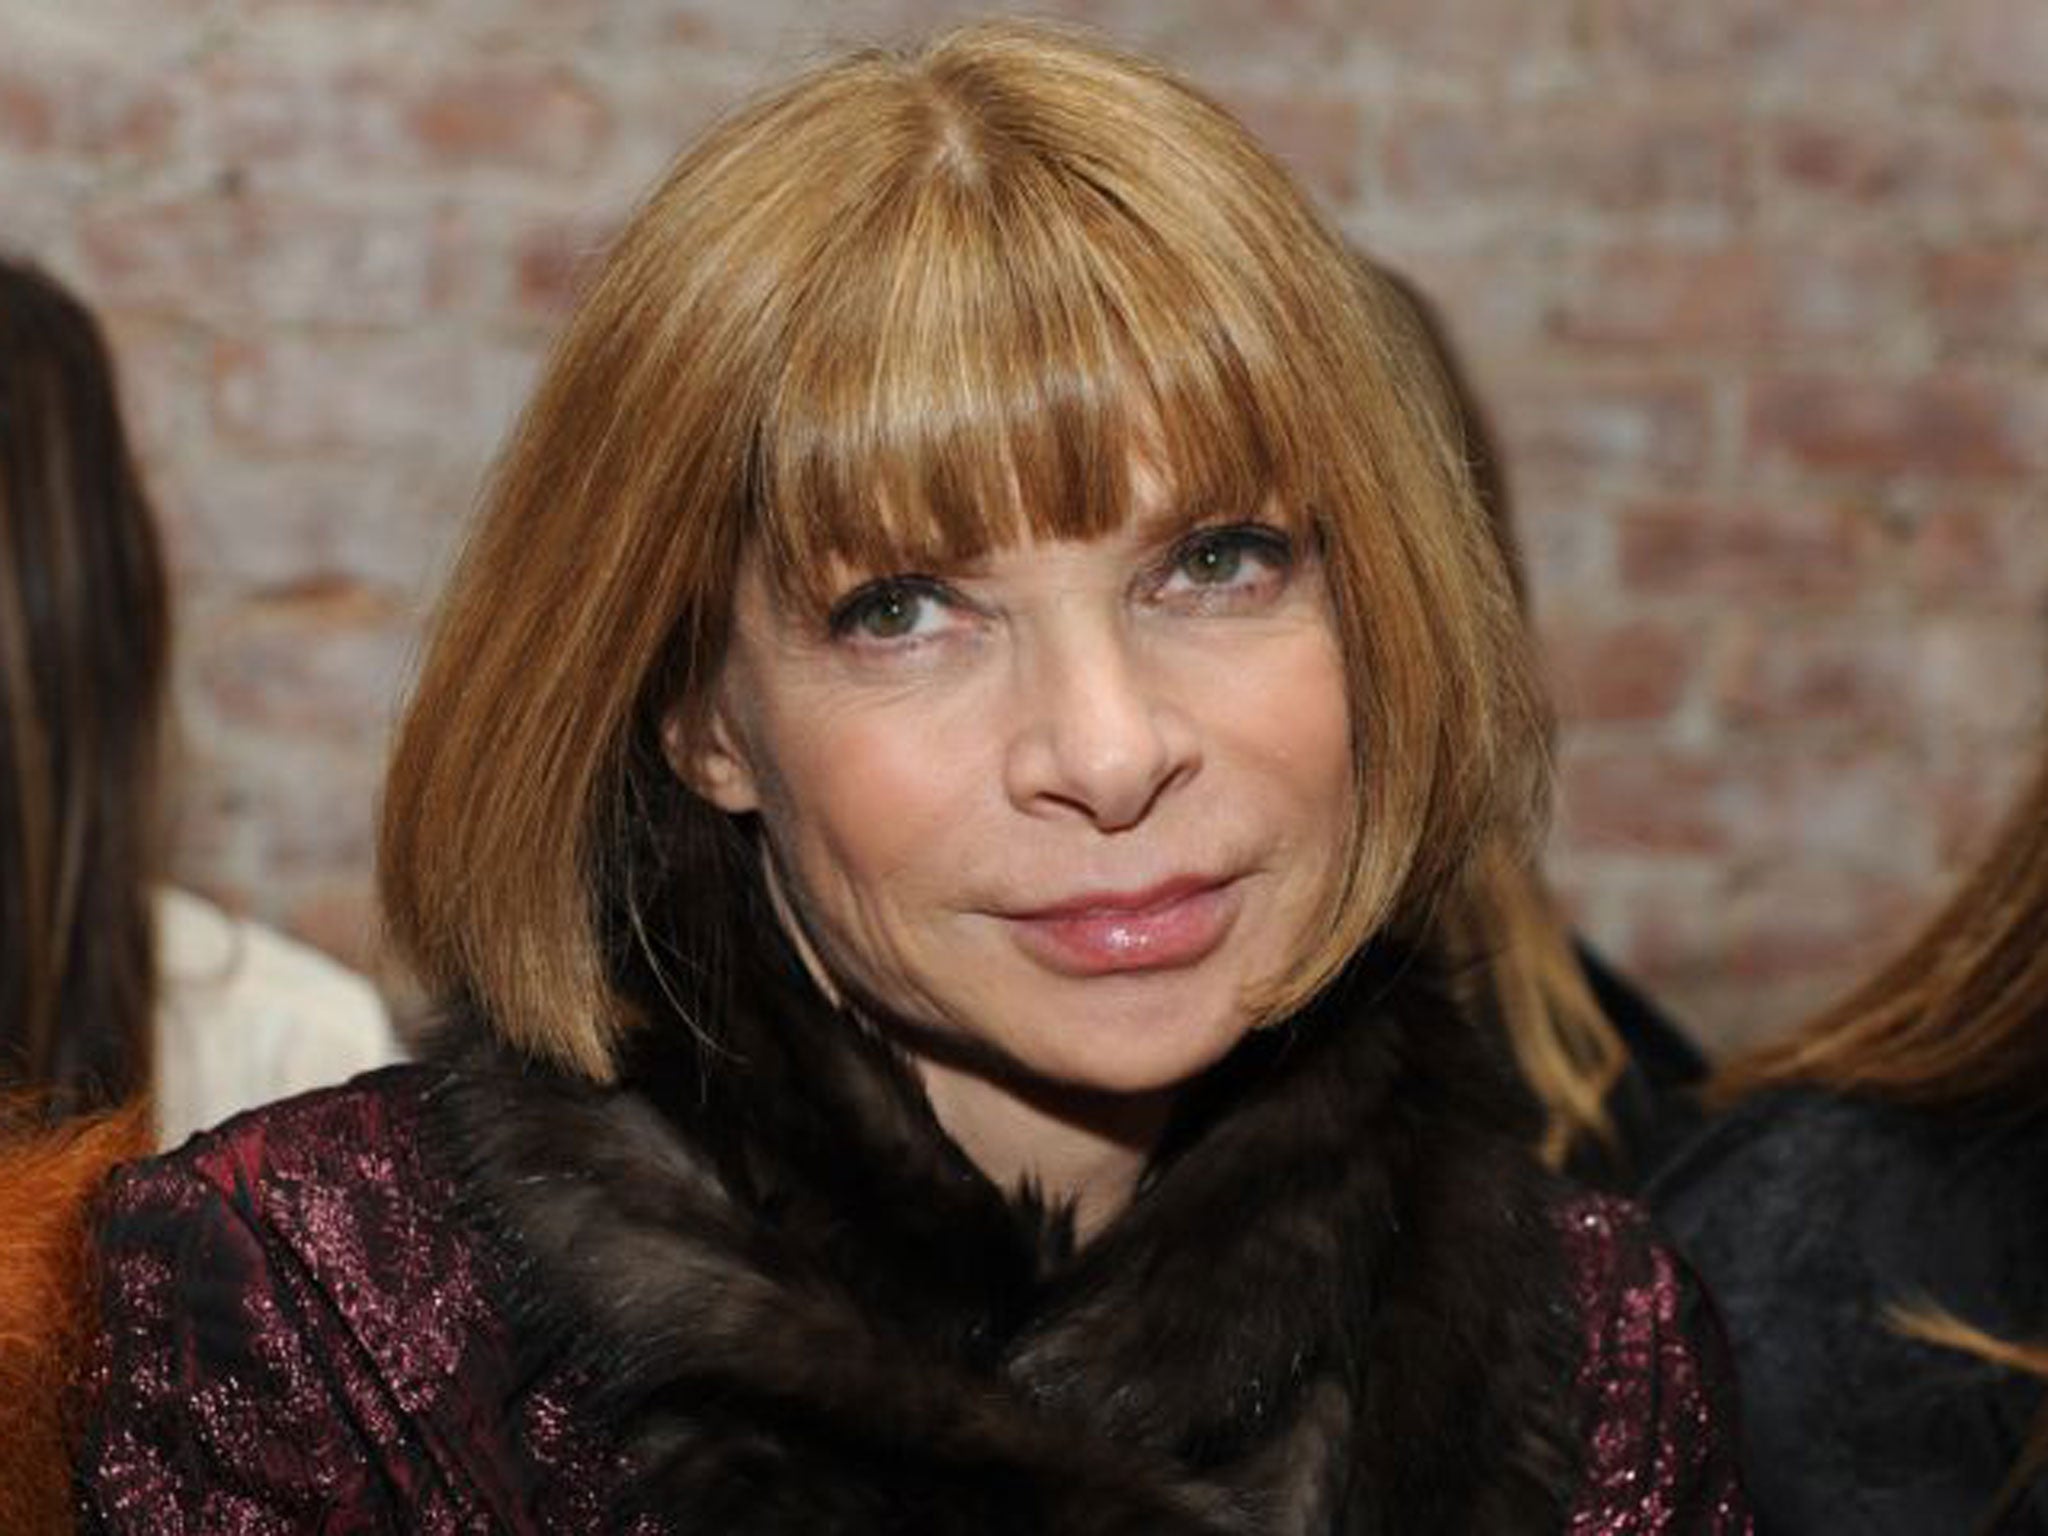 American Vogue editor-in-chief Anna Wintour